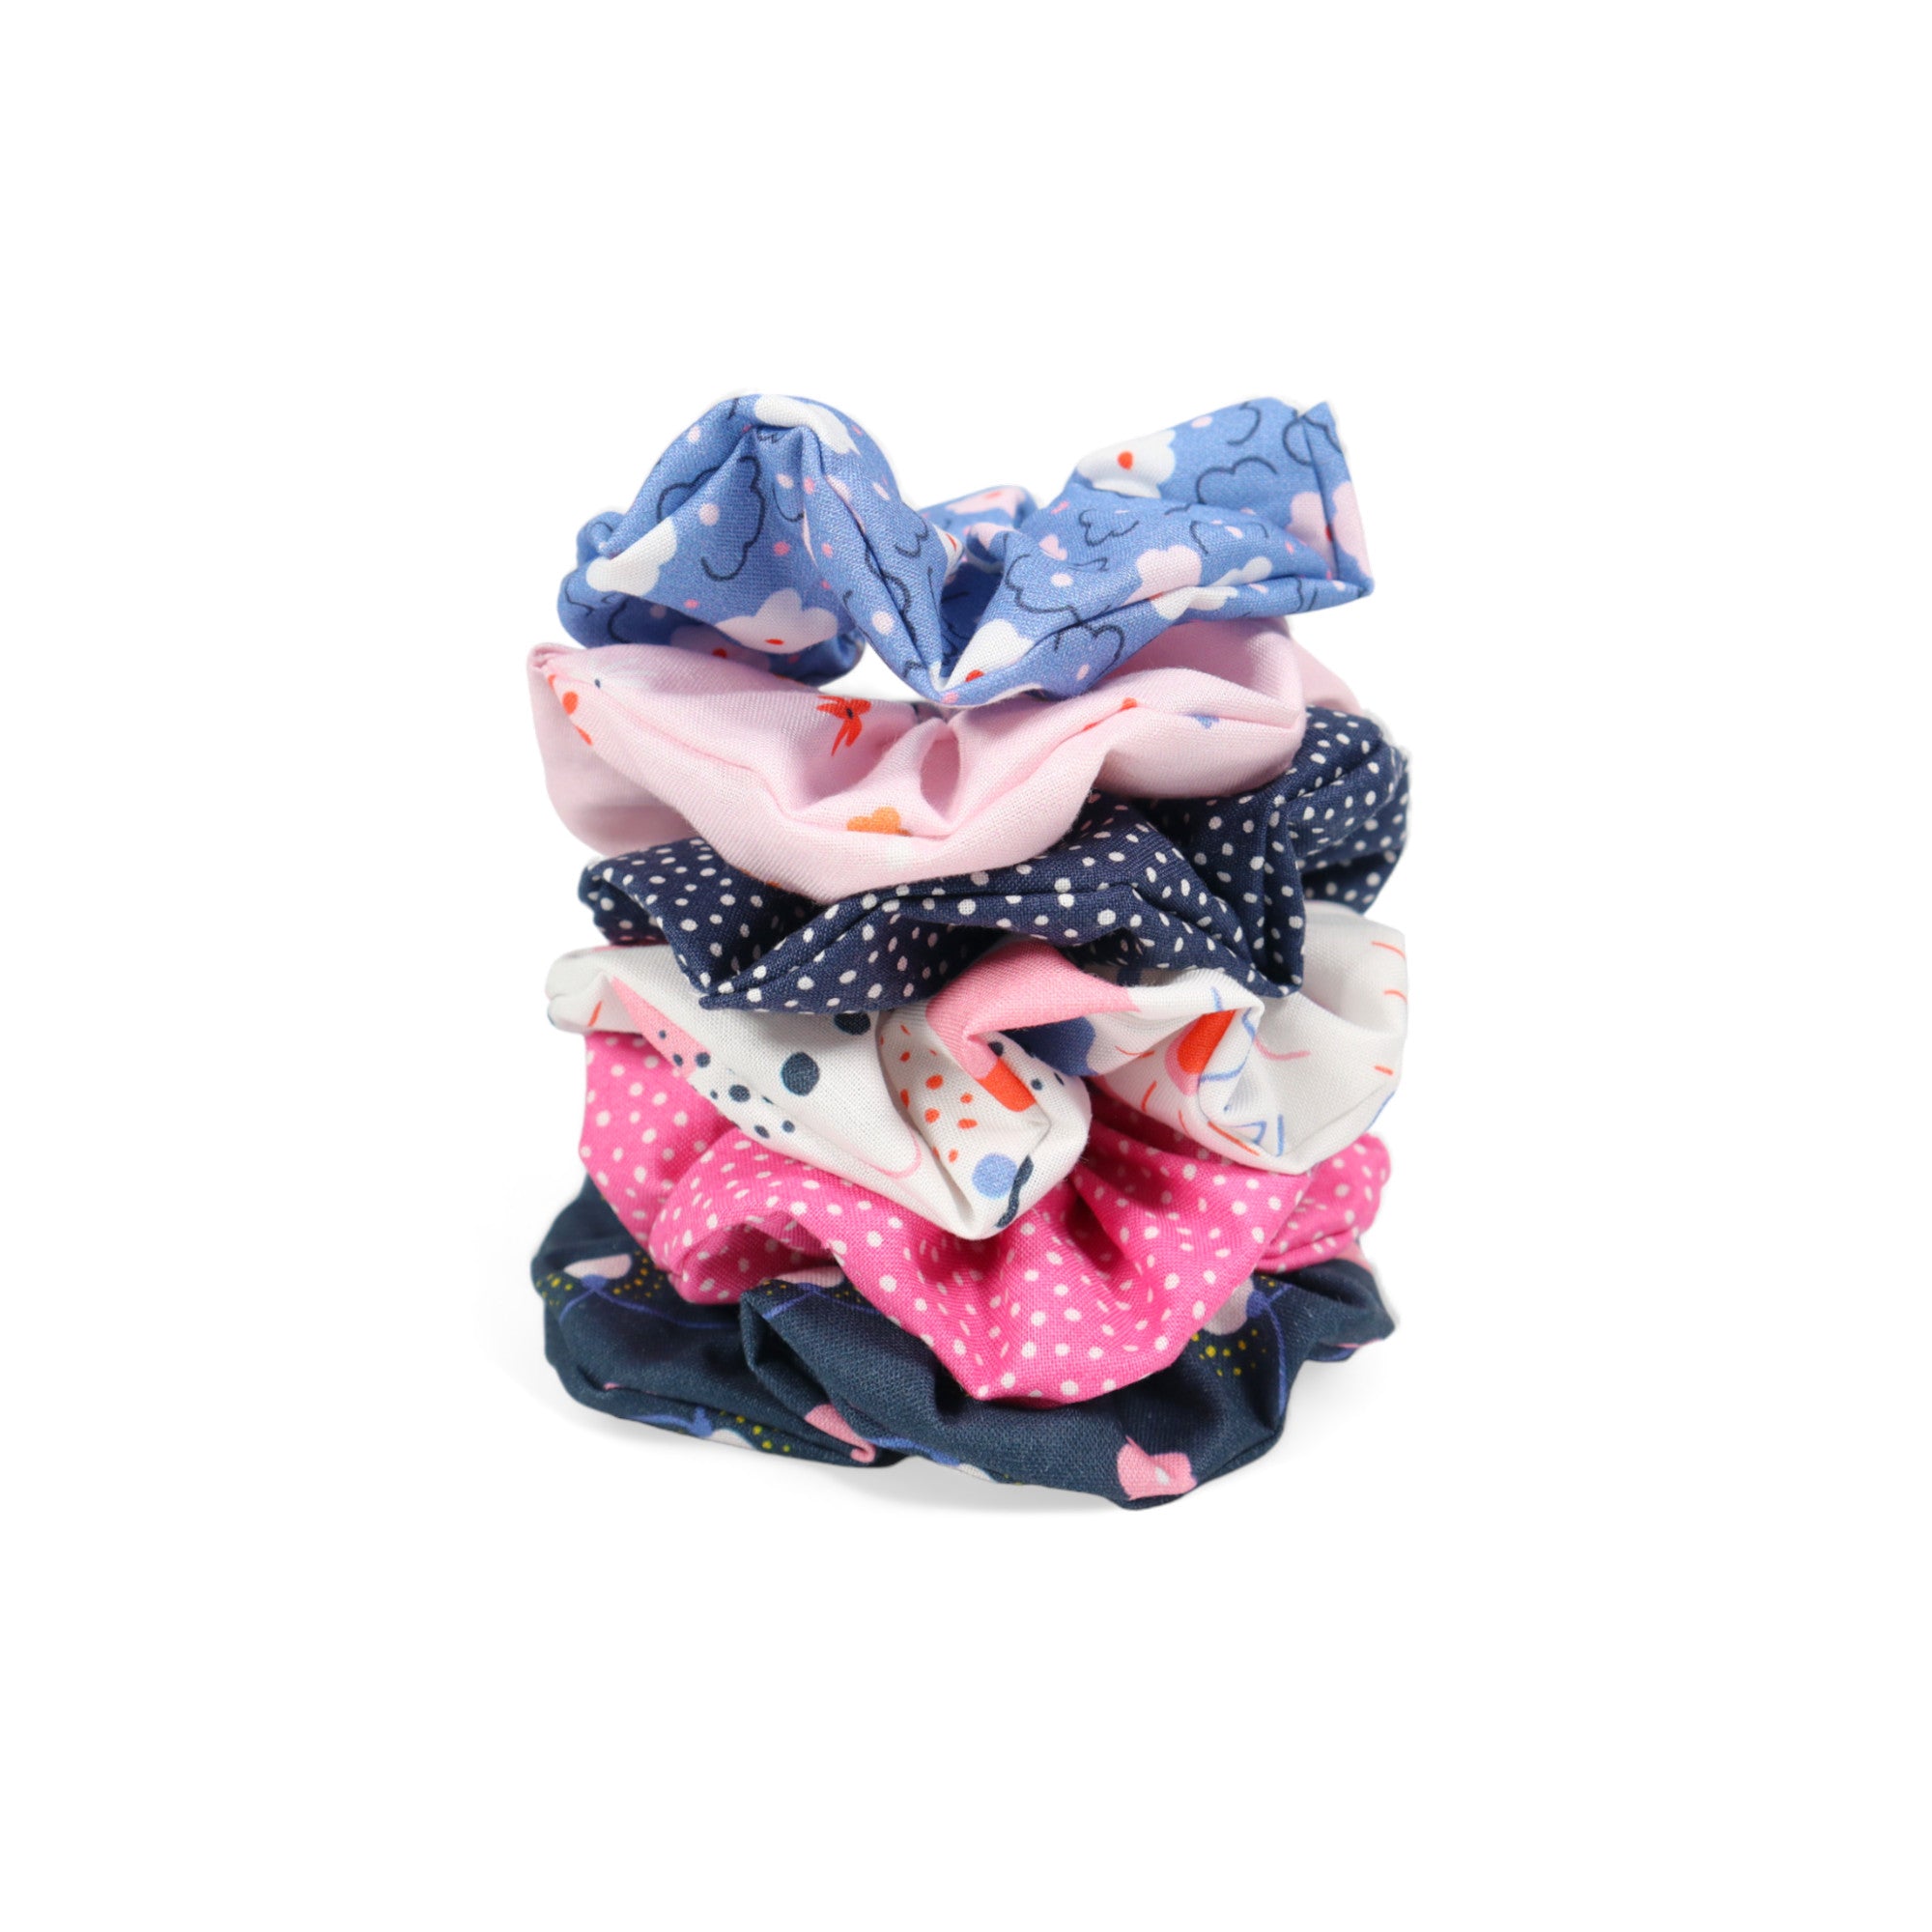 Crosscut Sewing Co. Scrunchie Sewing Kit - Cozy